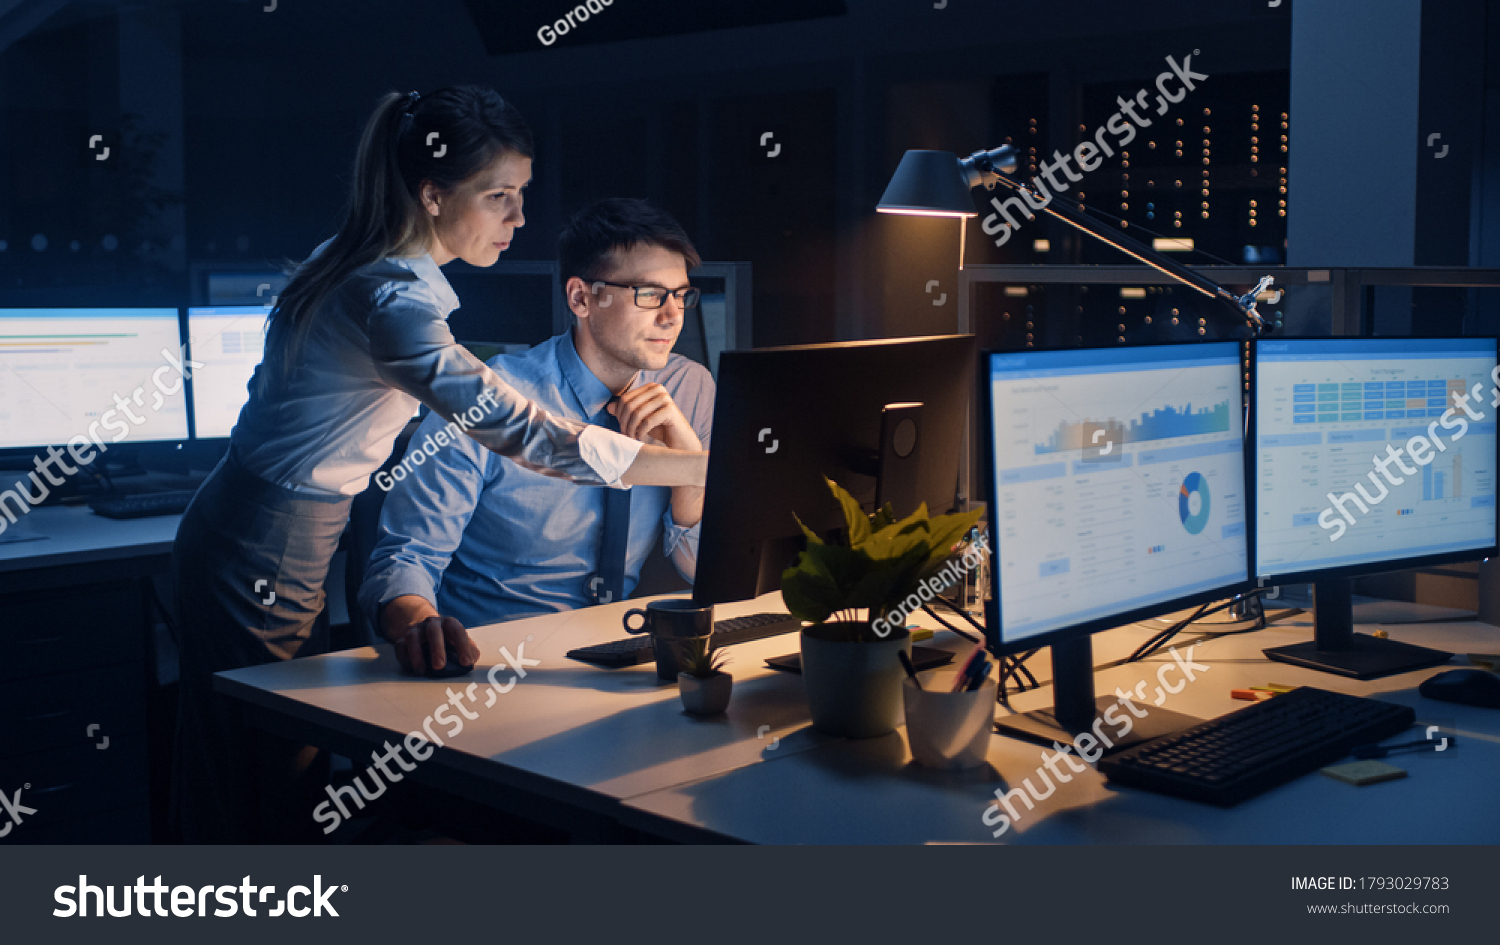 Businessman Uses Desktop Computer, His Female Project Manager Explains Specific Tasks, Account Handling and Strategic Moves. Professional People Late at Night in Big Corporate Office #1793029783